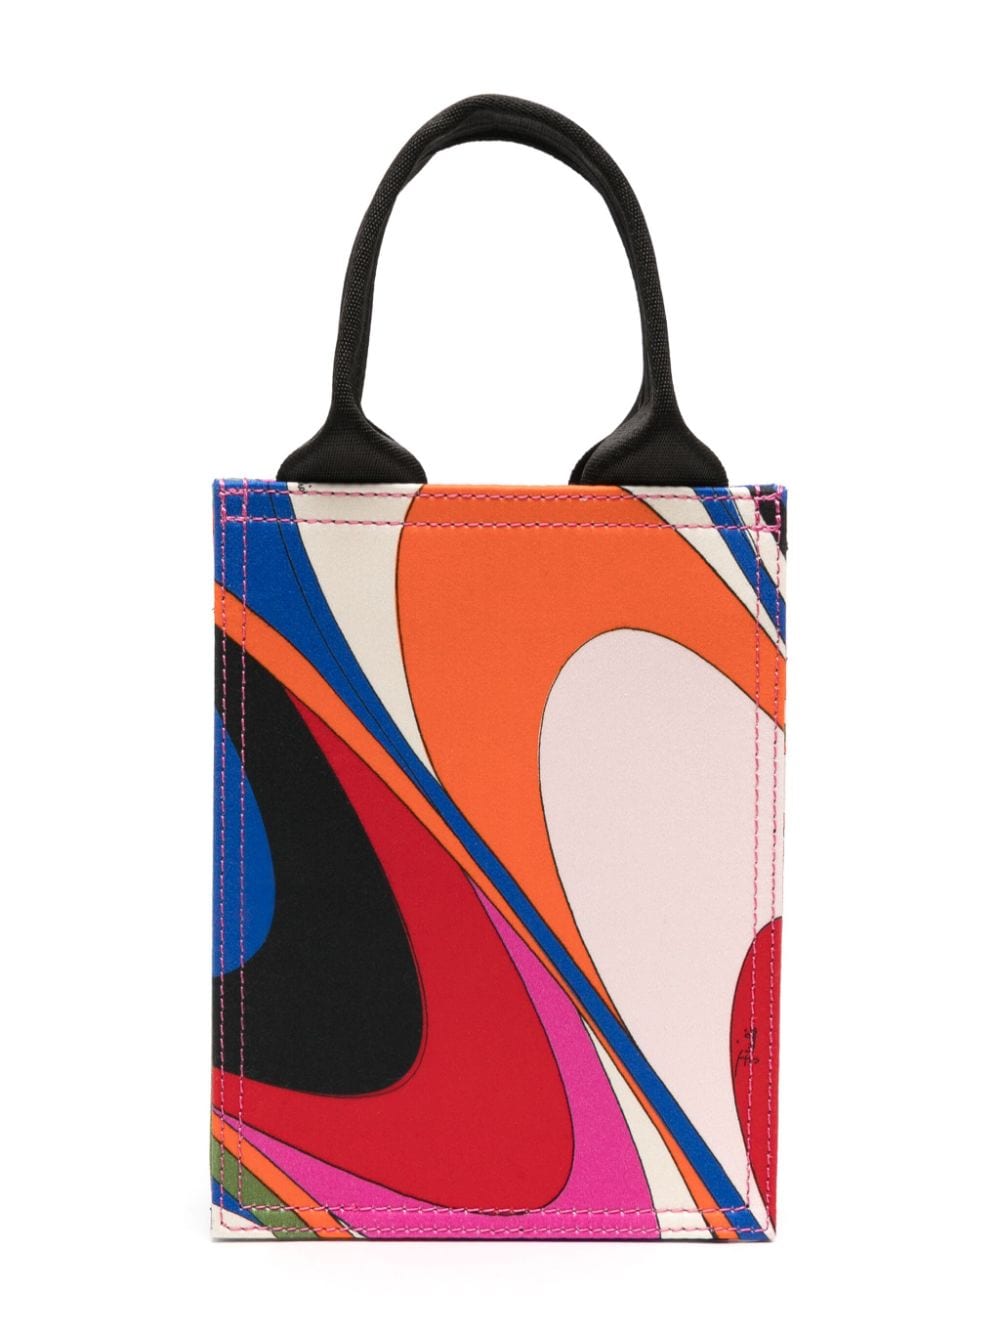 Multicolored bag for girls